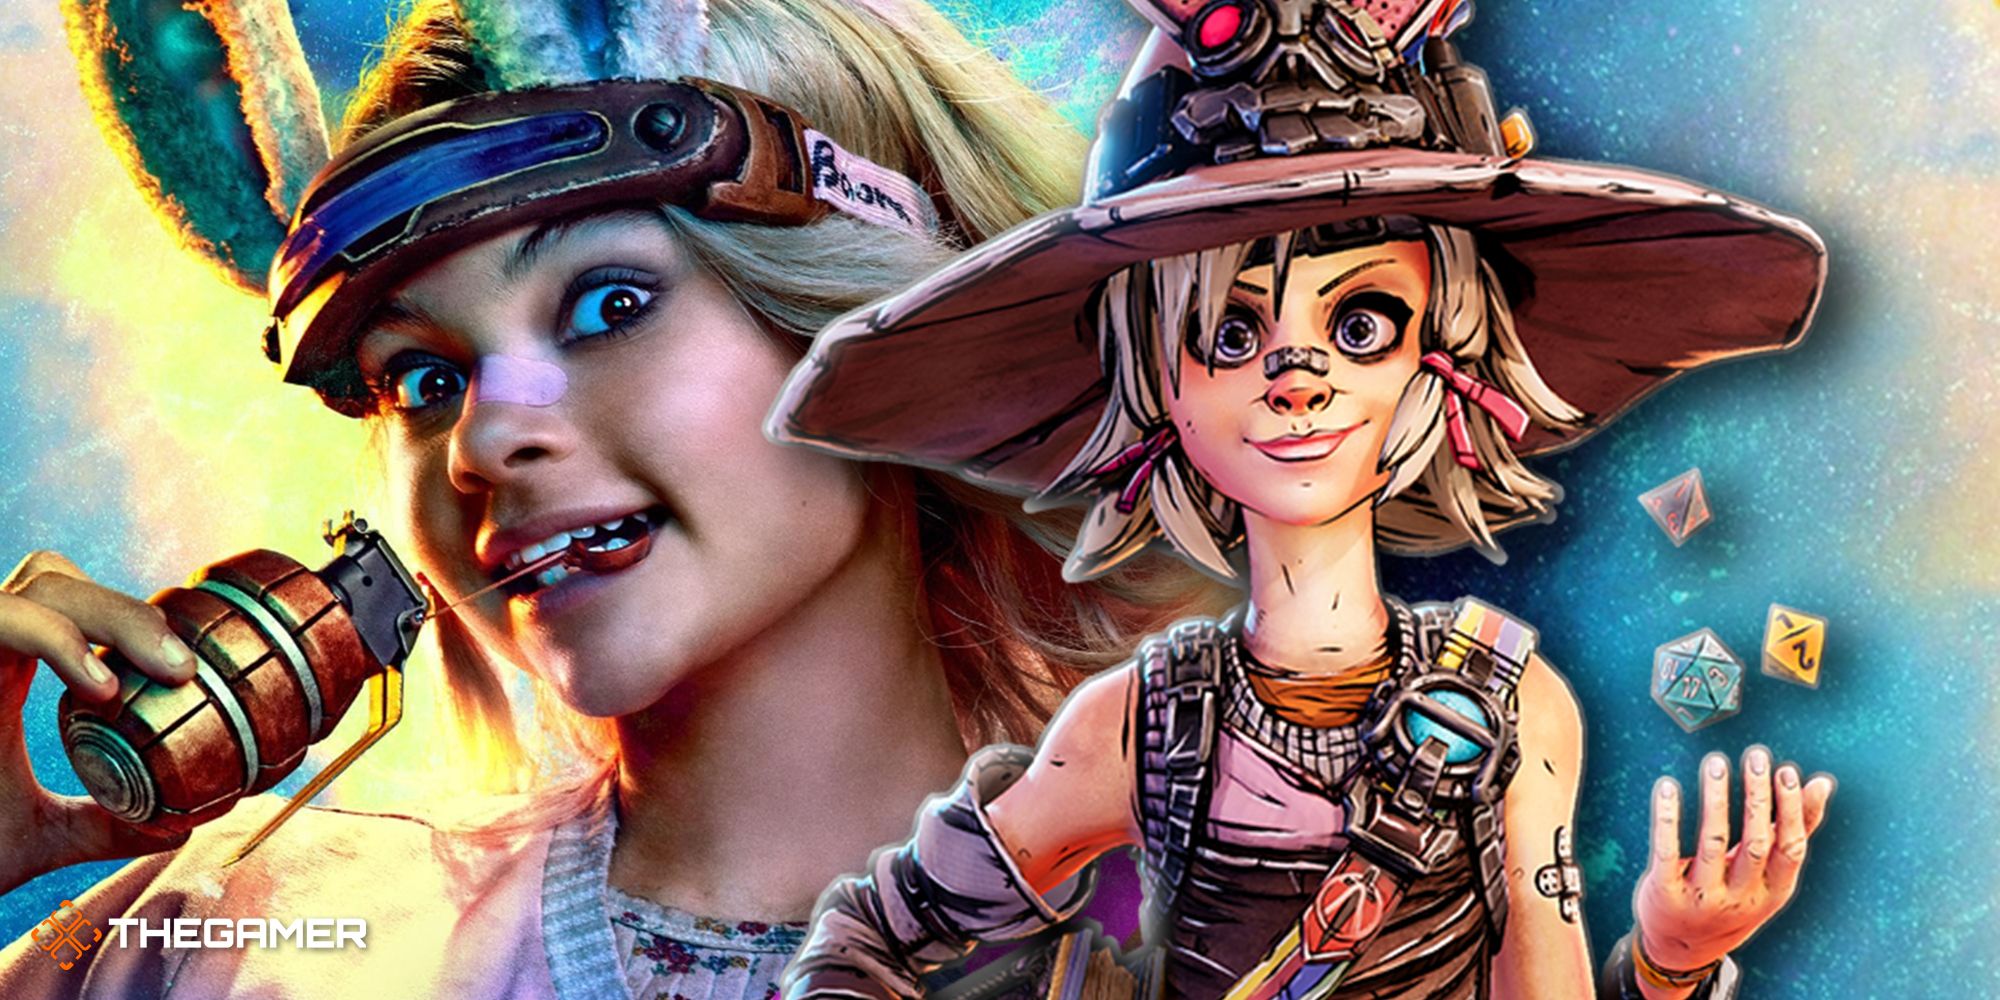 Ariana Greenblatt as Tiny Tina in the movie on the left, taking the pin out of a grenade with her teeth. Game Tiny Tina tossing dice in the air on the right.